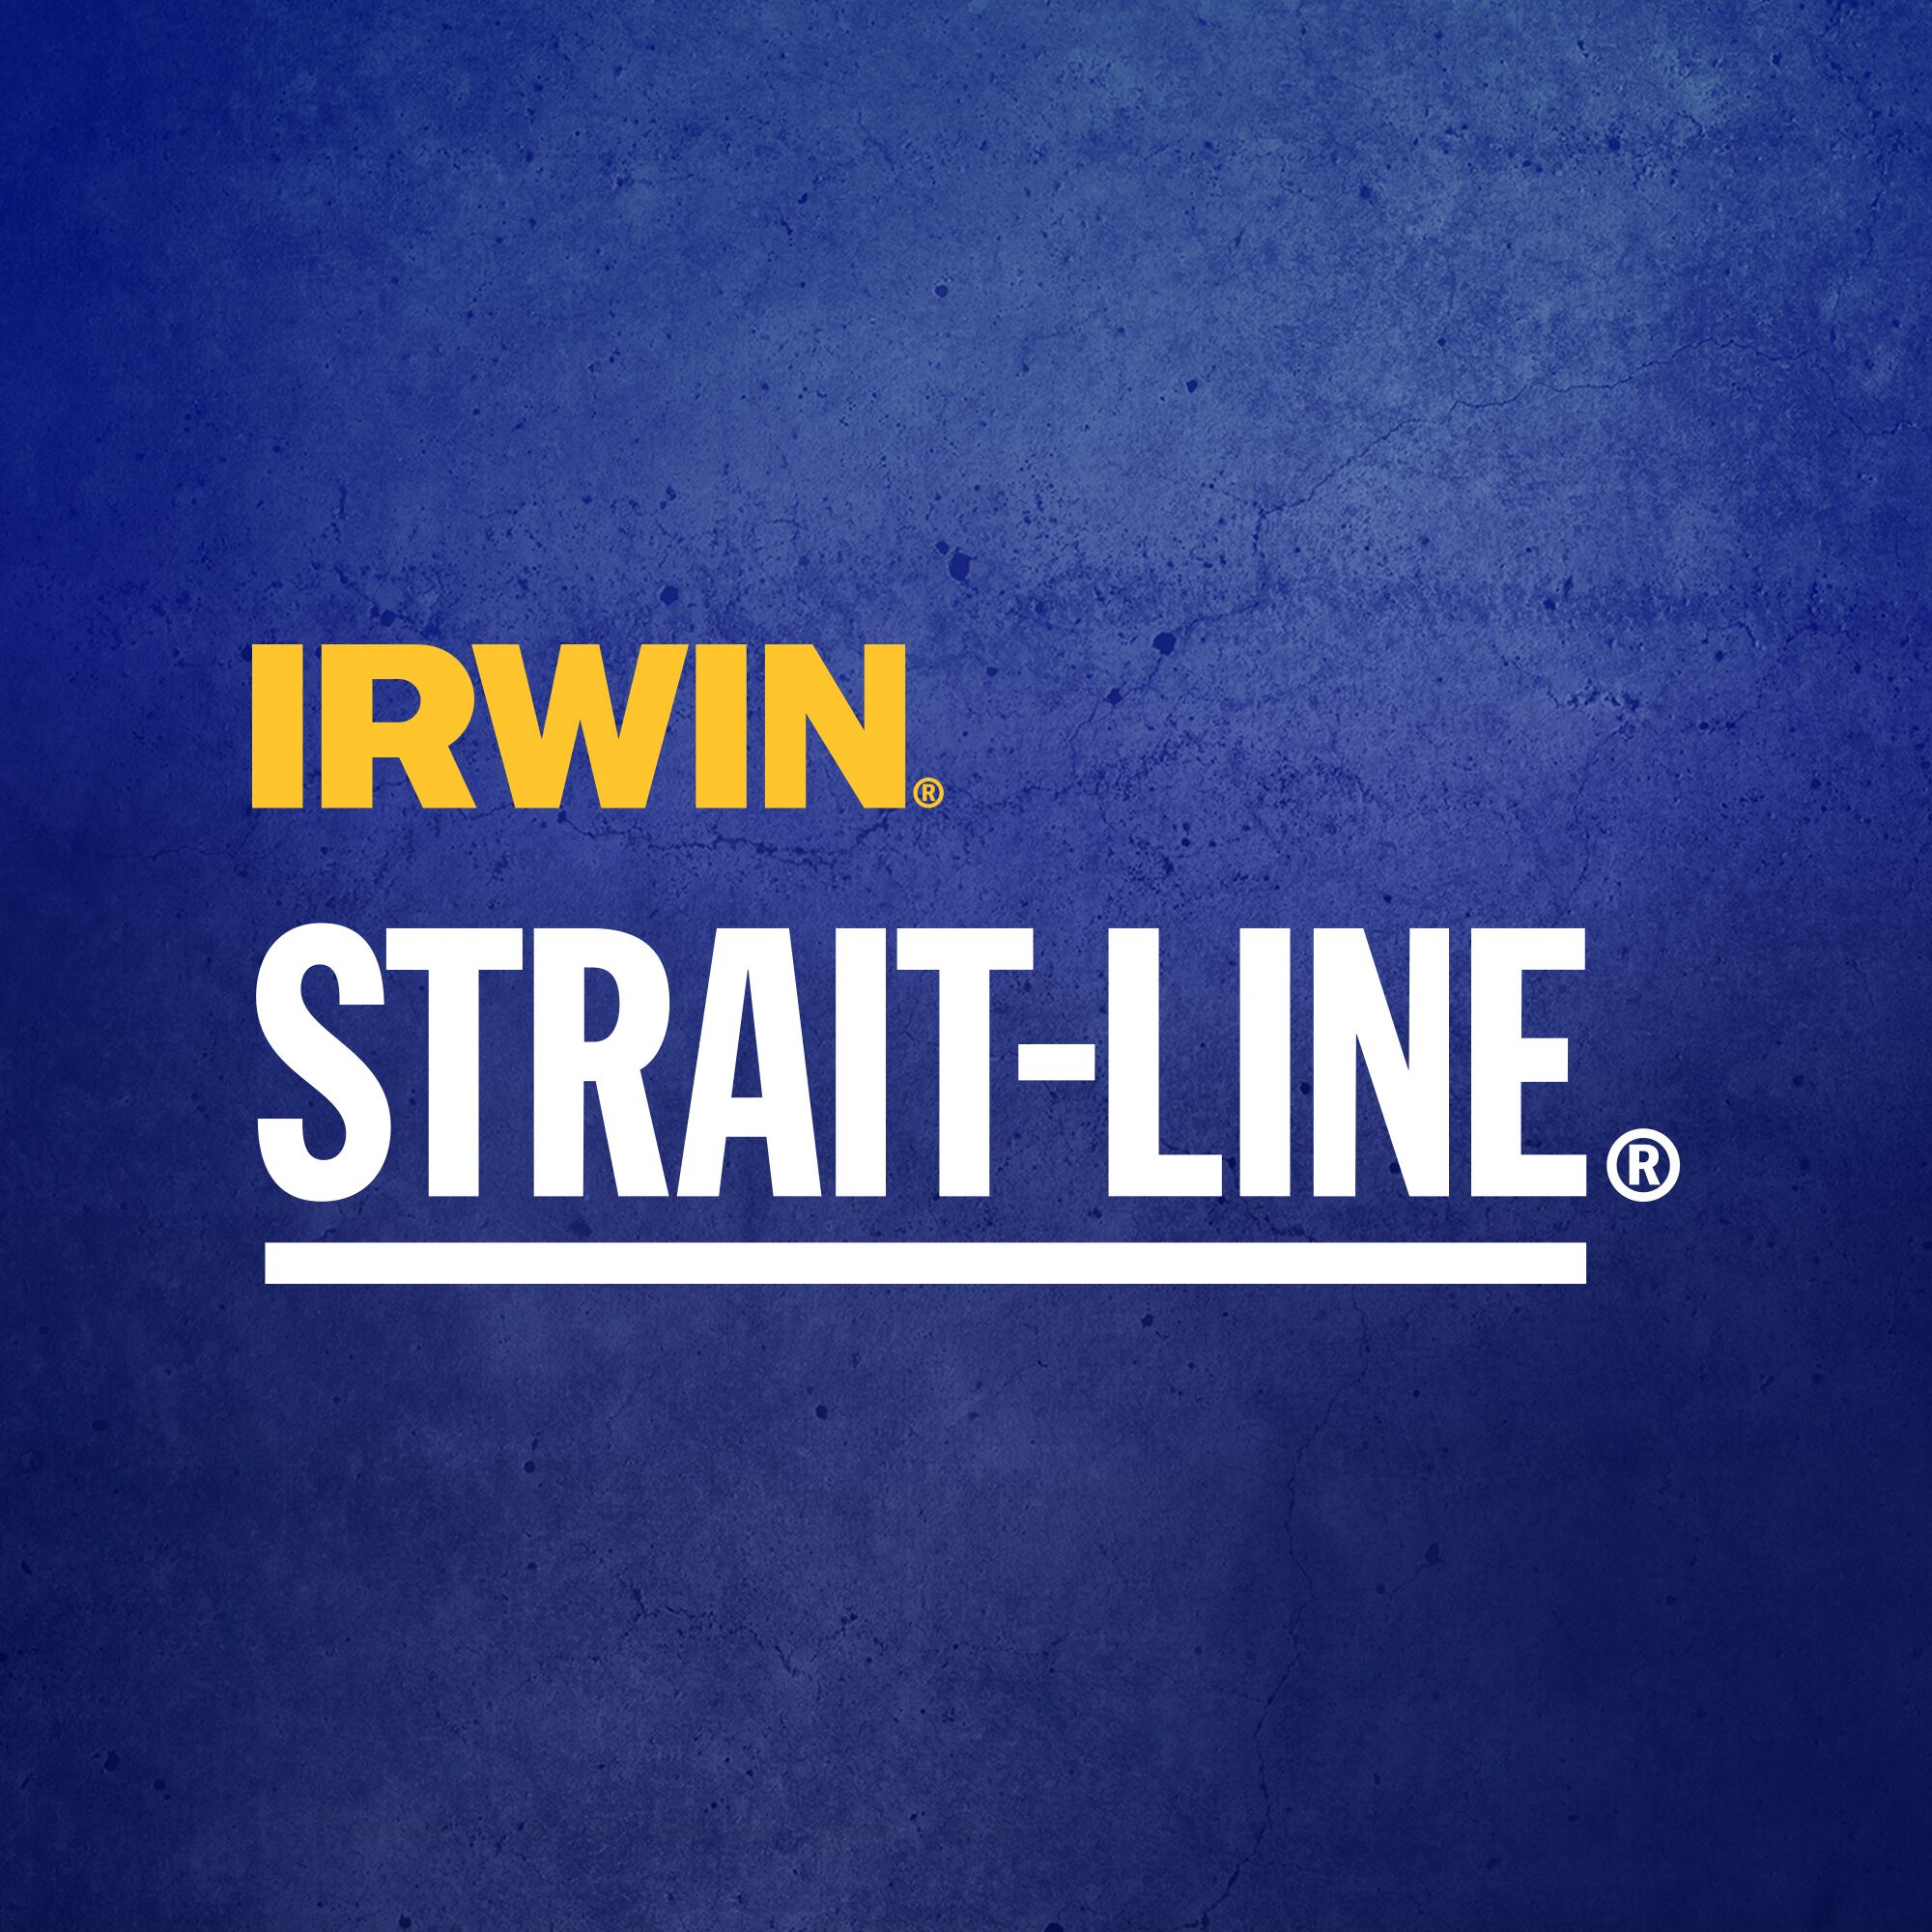 IRWIN STRAIT-LINE Classic 3:1 30-ft Chalk Reel in the Chalk Reels  department at